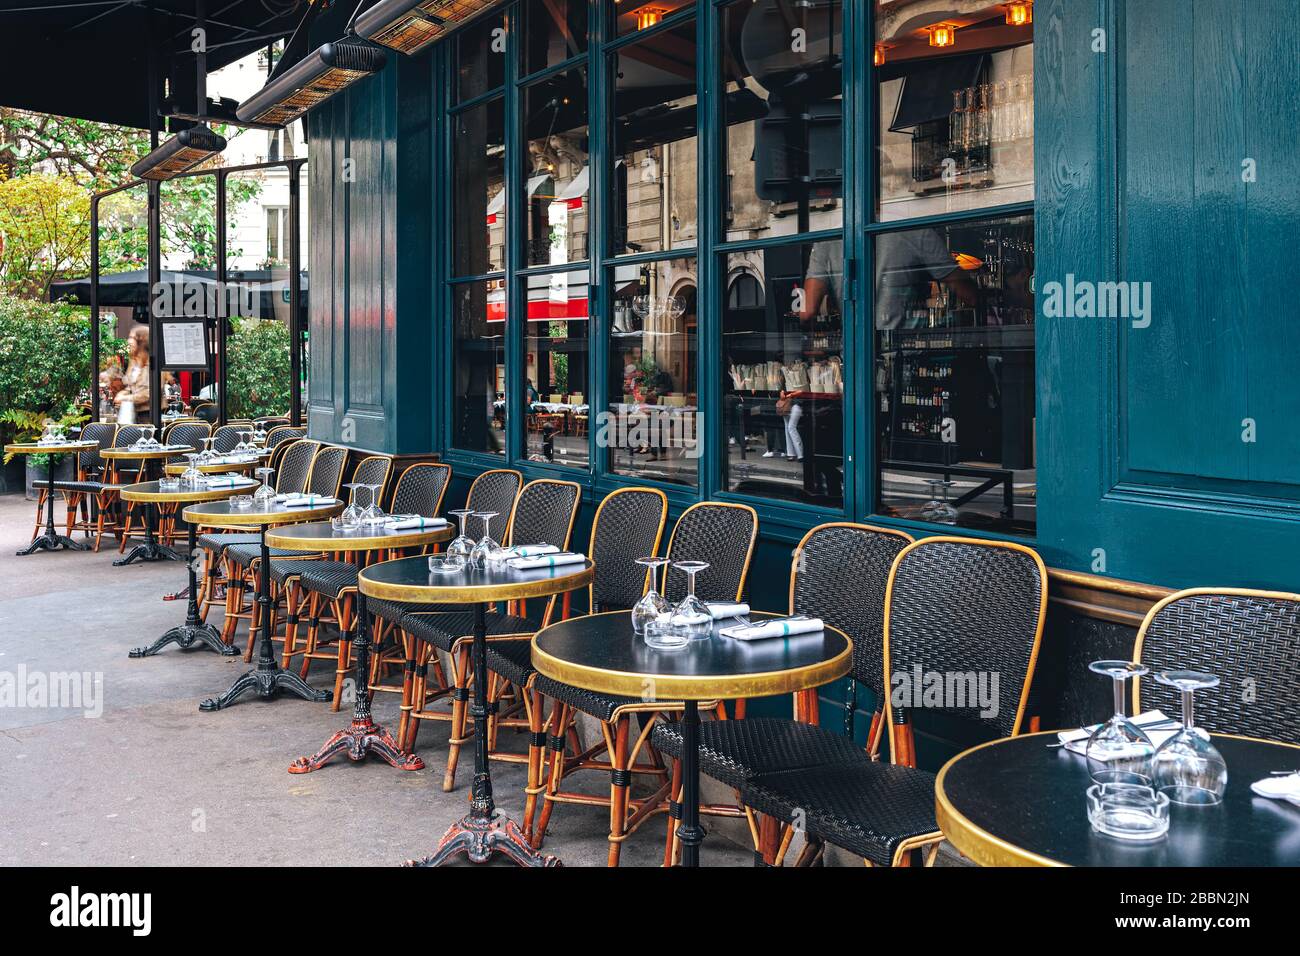 Tables and chairs in outdoor cafe in Paris, France. Stock Photo